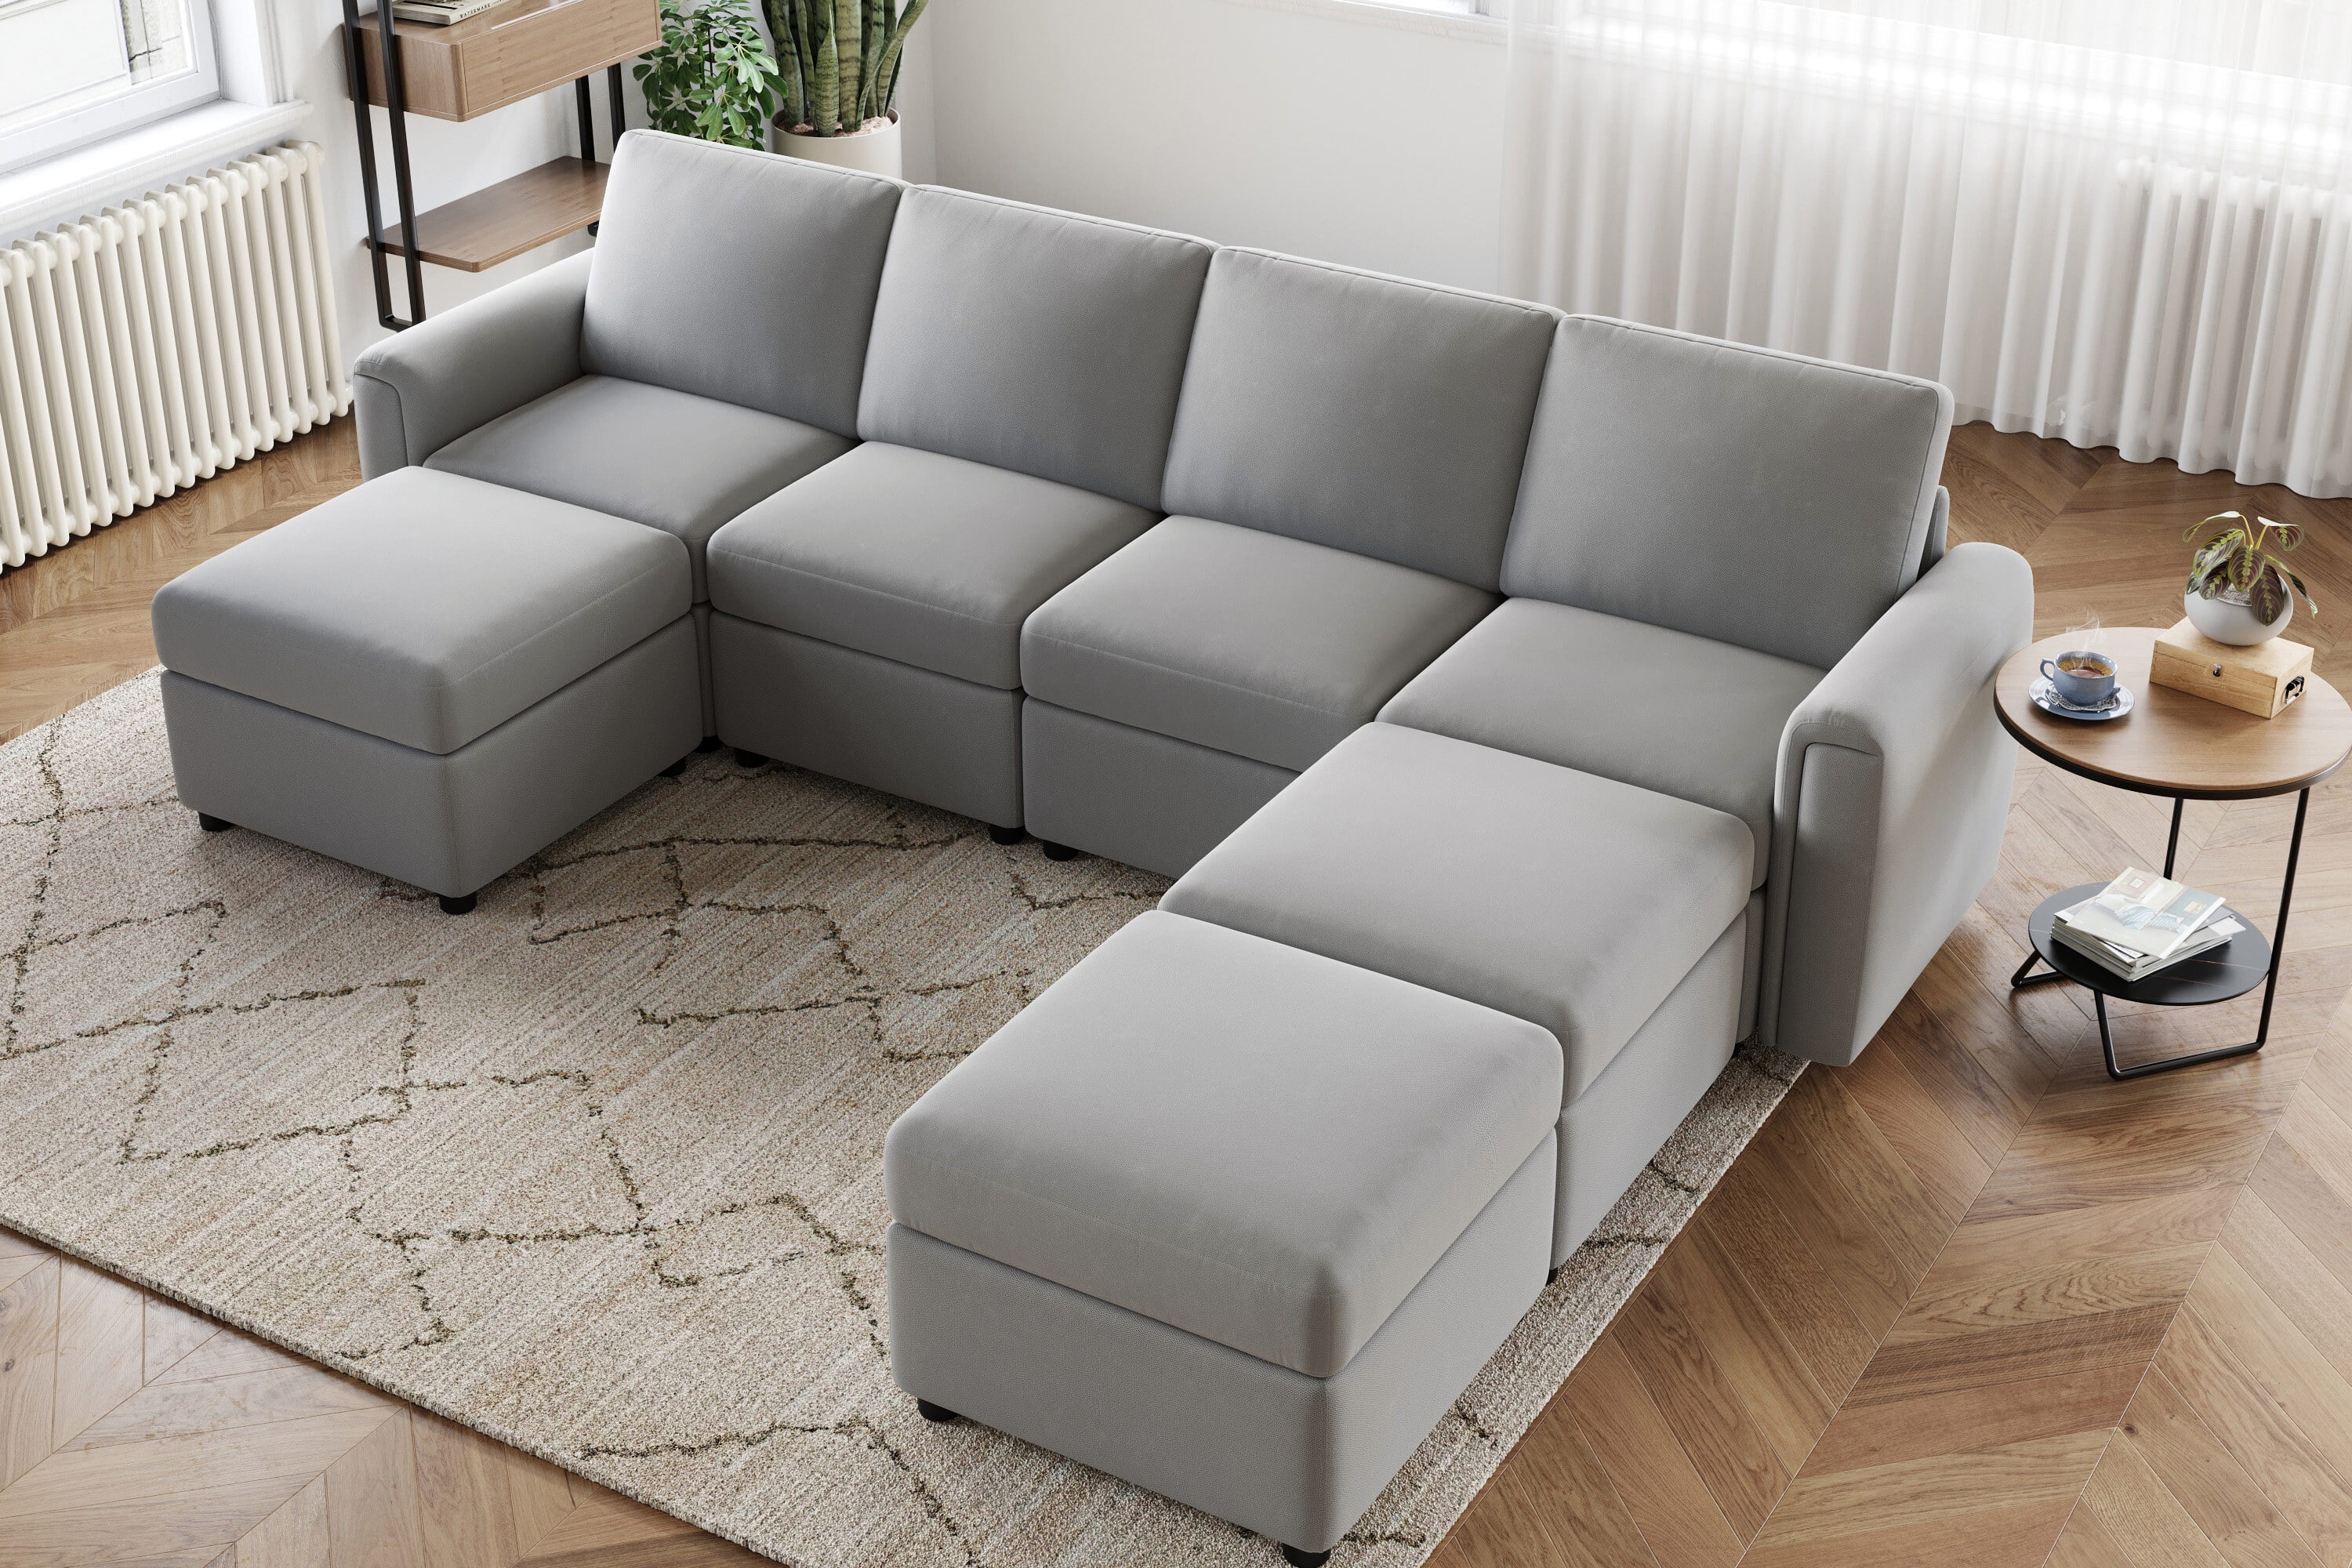 LINSY HOME Modular Couches and Sofas Sectional with Storage Sectional Sofa  L Shaped Sectional Couch with Reversible Chaises, Light Gray